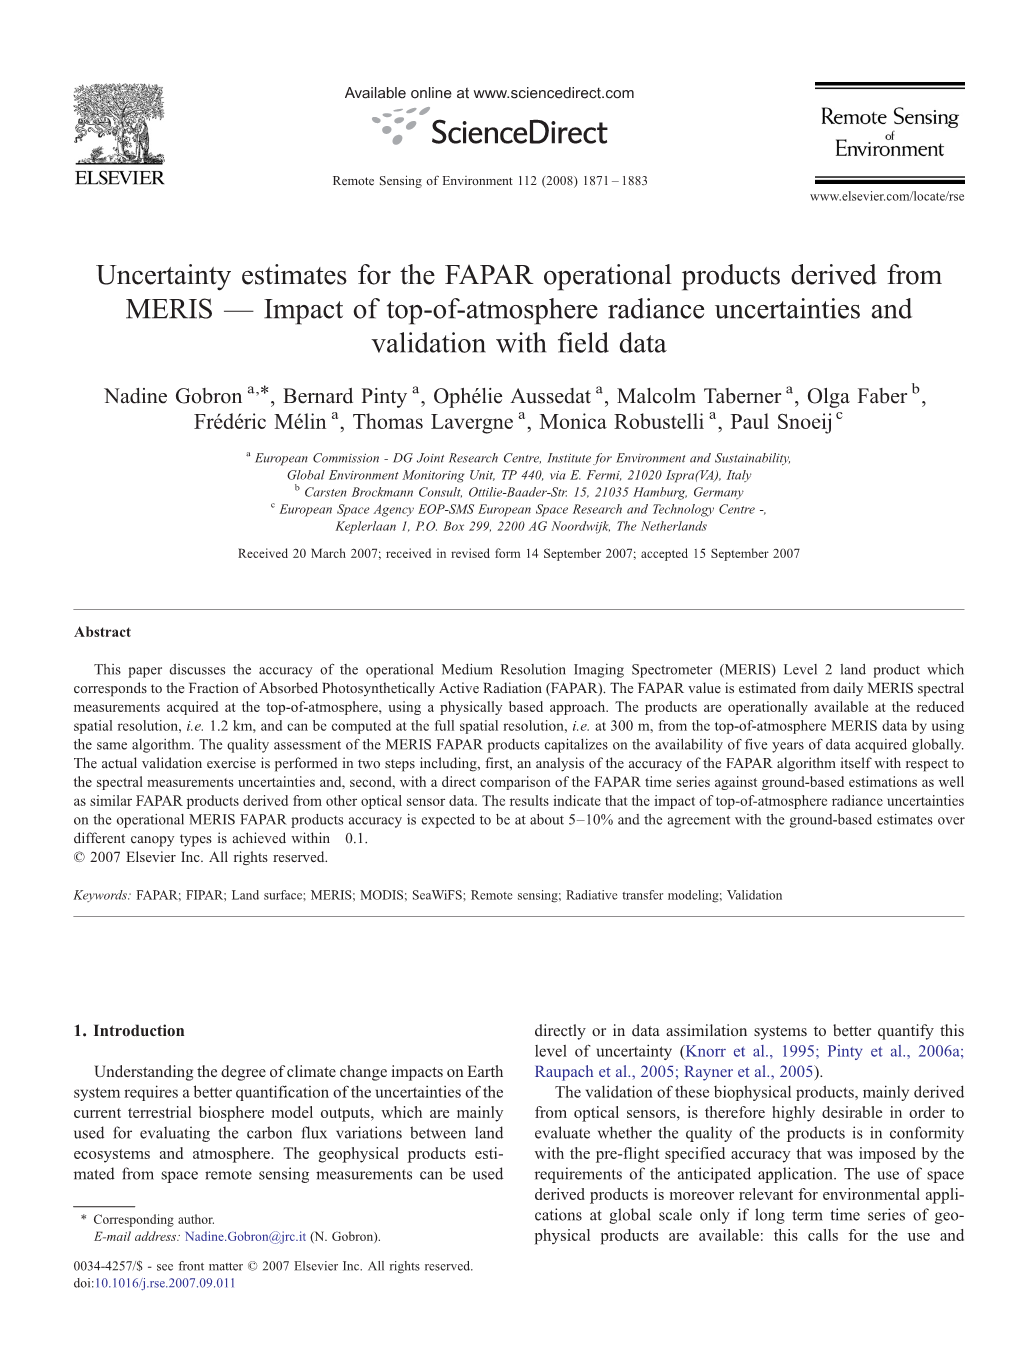 Uncertainty Estimates for the FAPAR Operational Products Derived from MERIS — Impact of Top-Of-Atmosphere Radiance Uncertainties and Validation with Field Data